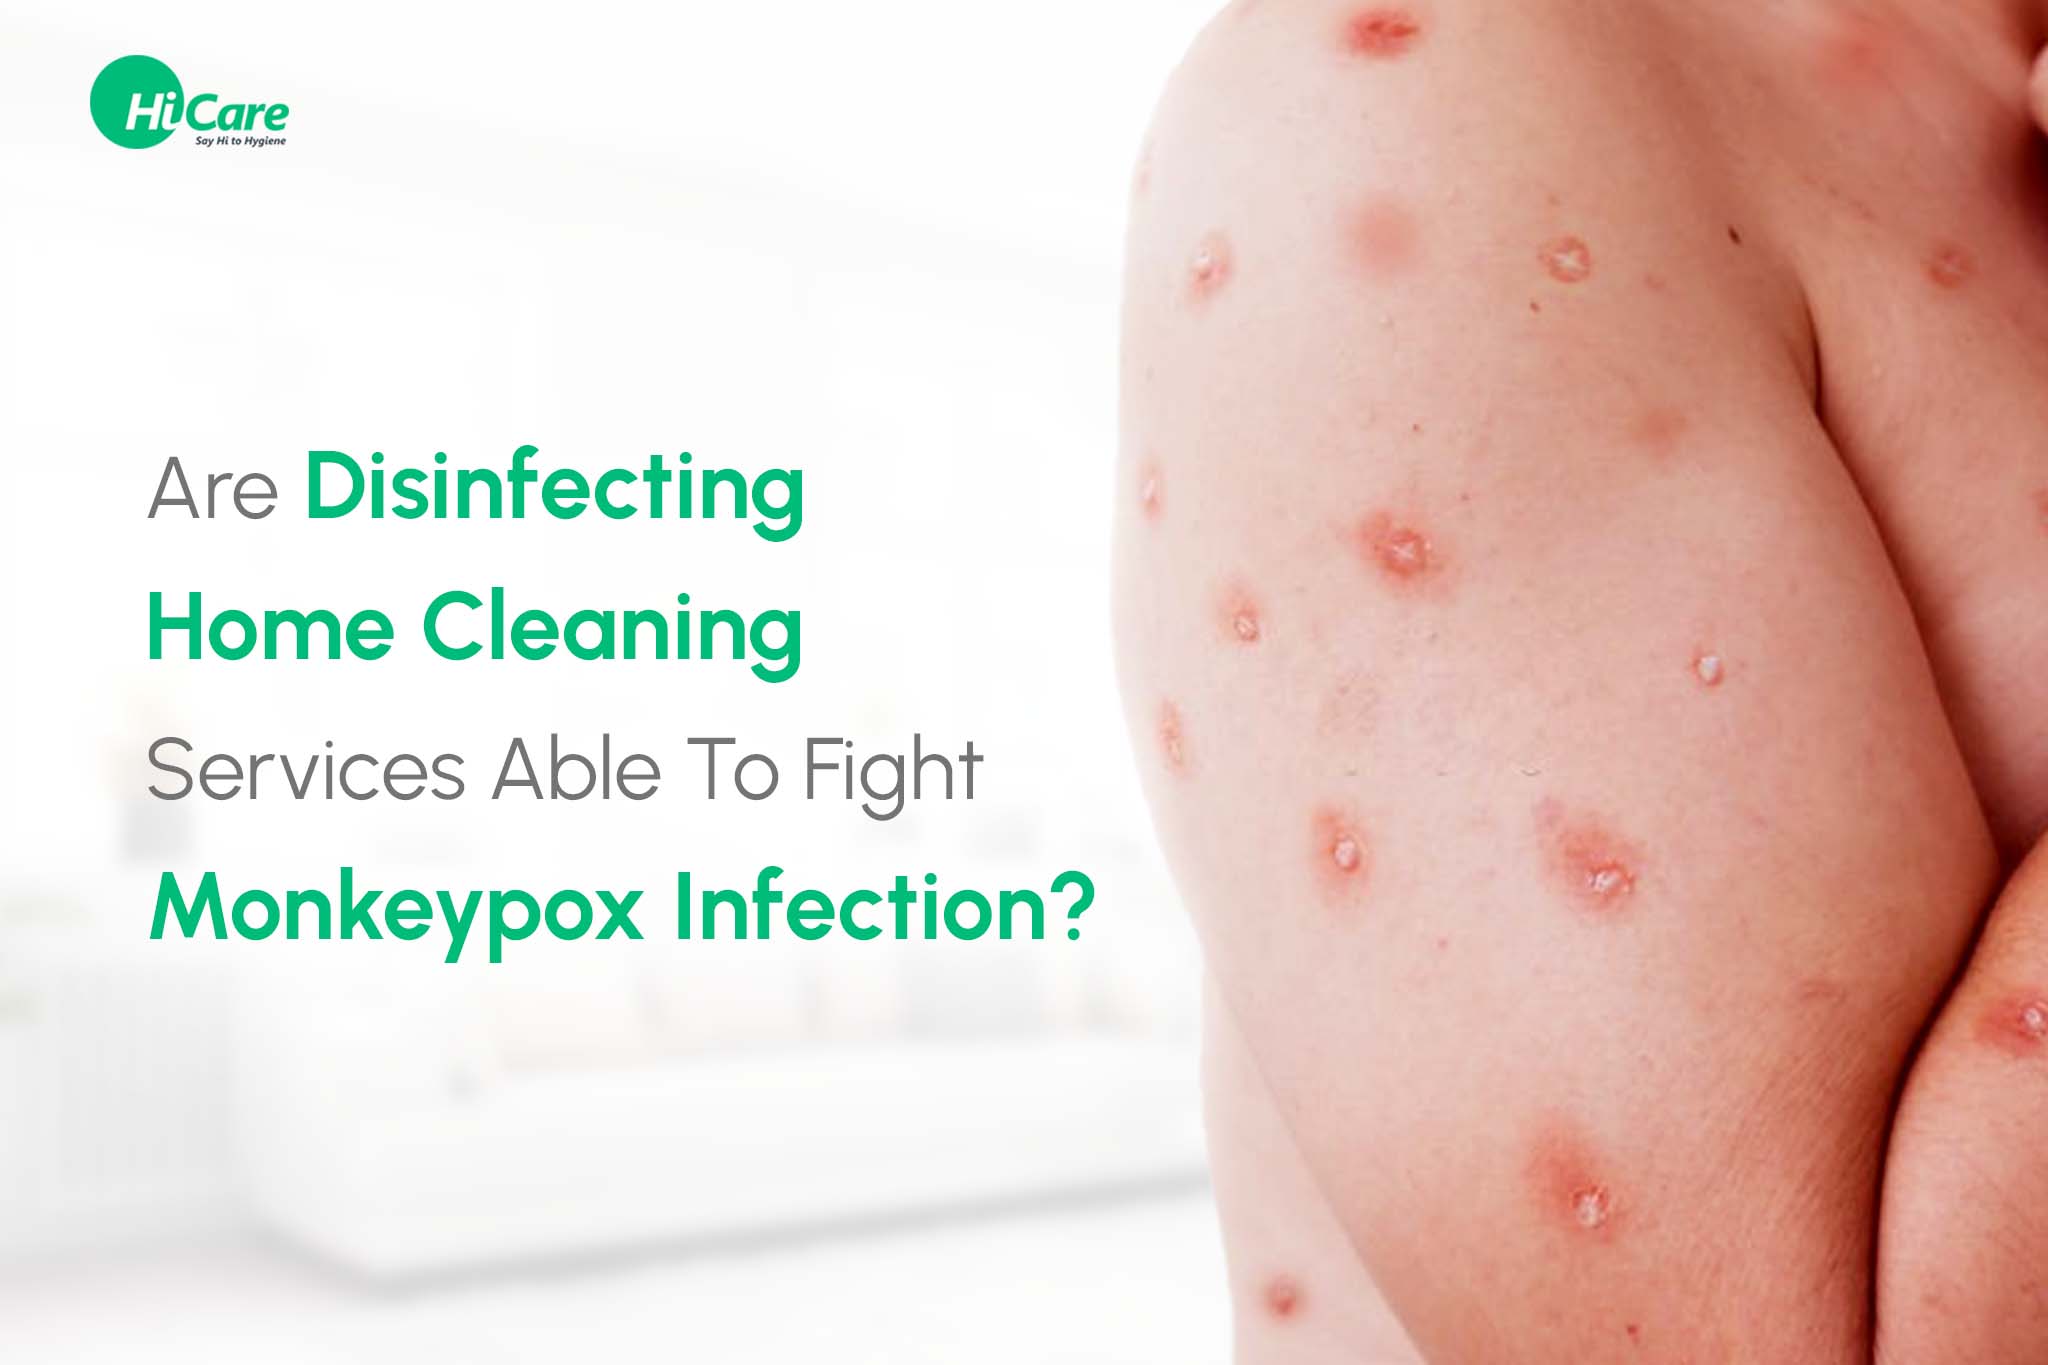 Are Disinfecting Home Cleaning Services Able To Fight Monkeypox Infection?